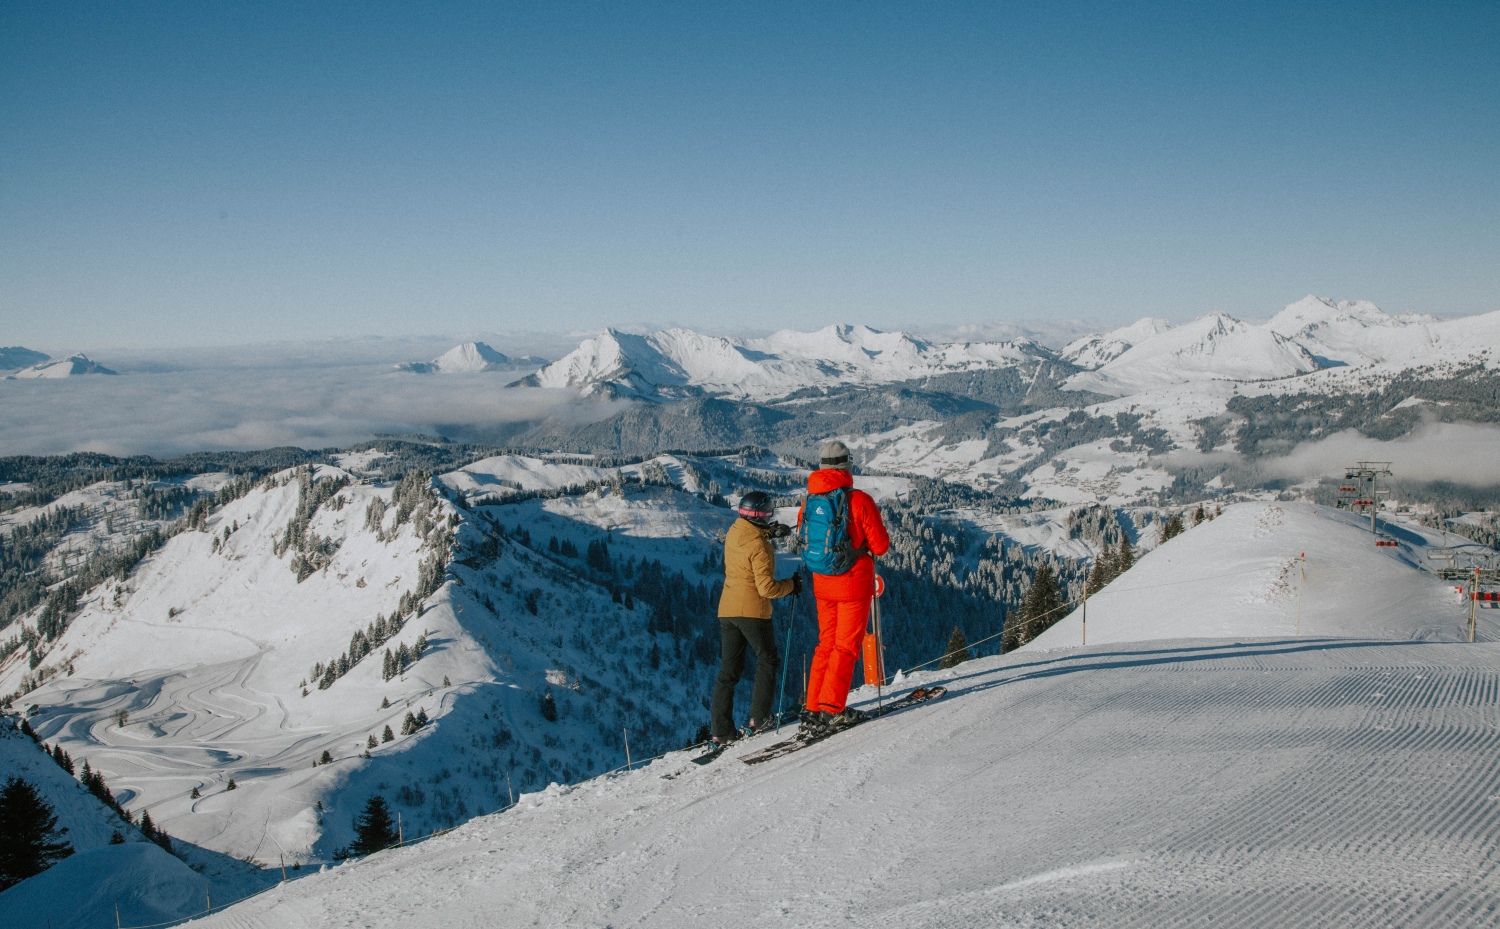 Skiers at top of slope looking out over mountains